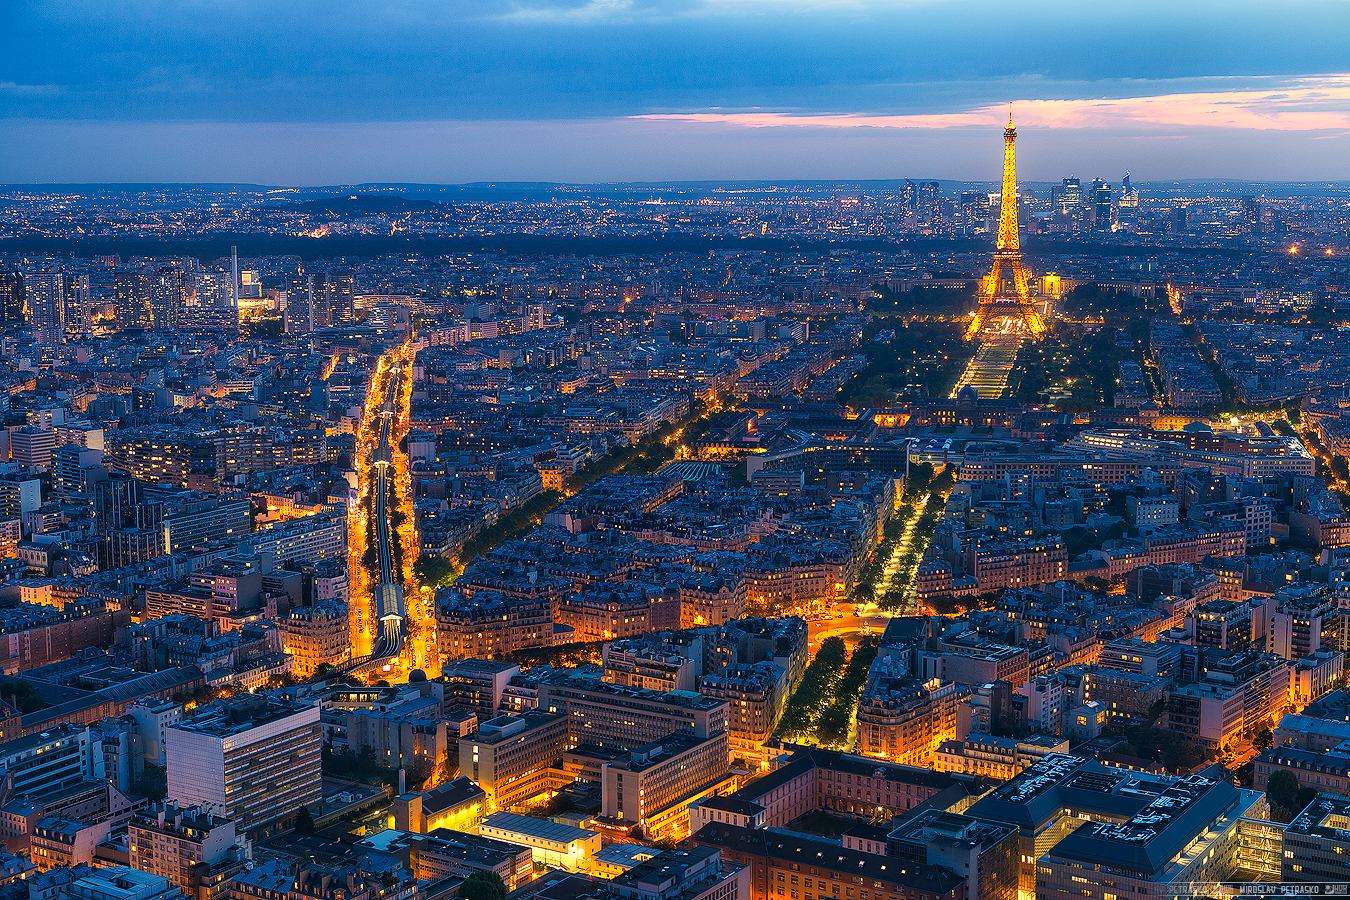 Enjoy the best view over Paris during the Dermatology and